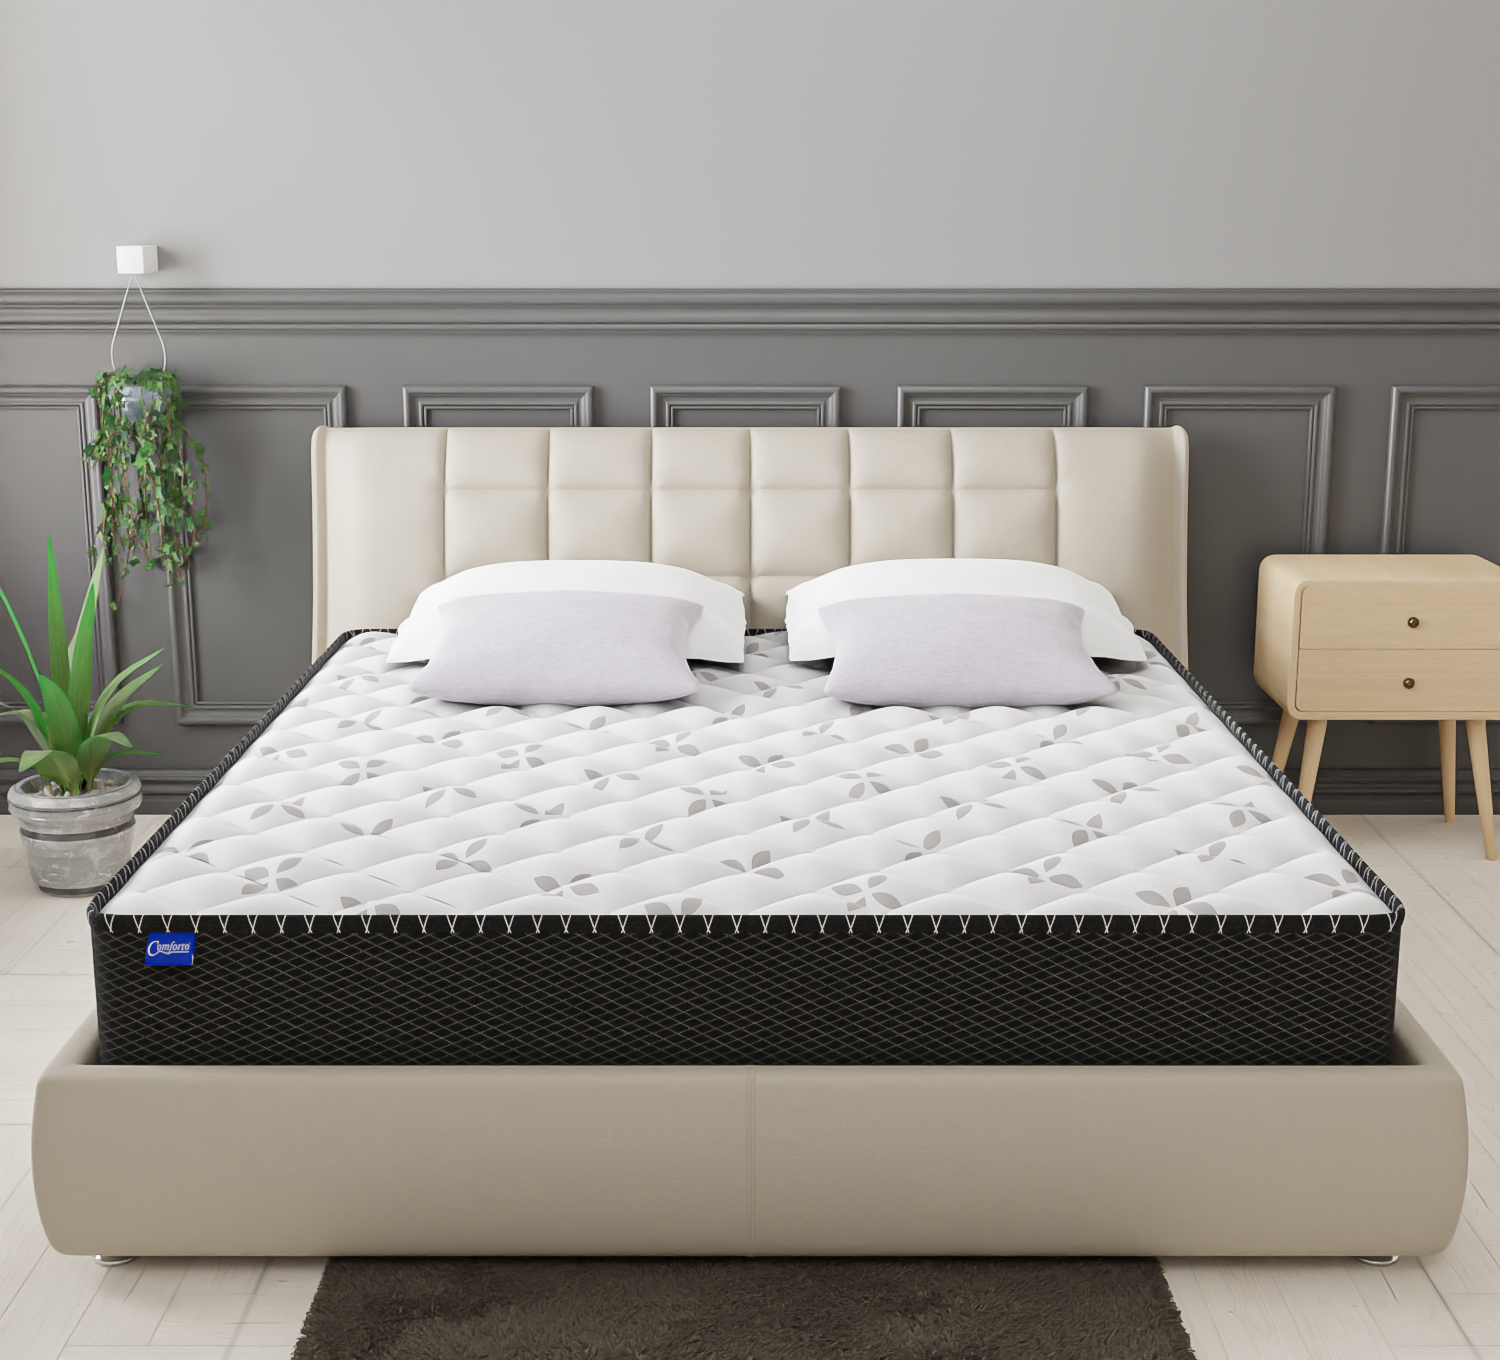 How to Choose the Best Mattress: 10 Pro Tips